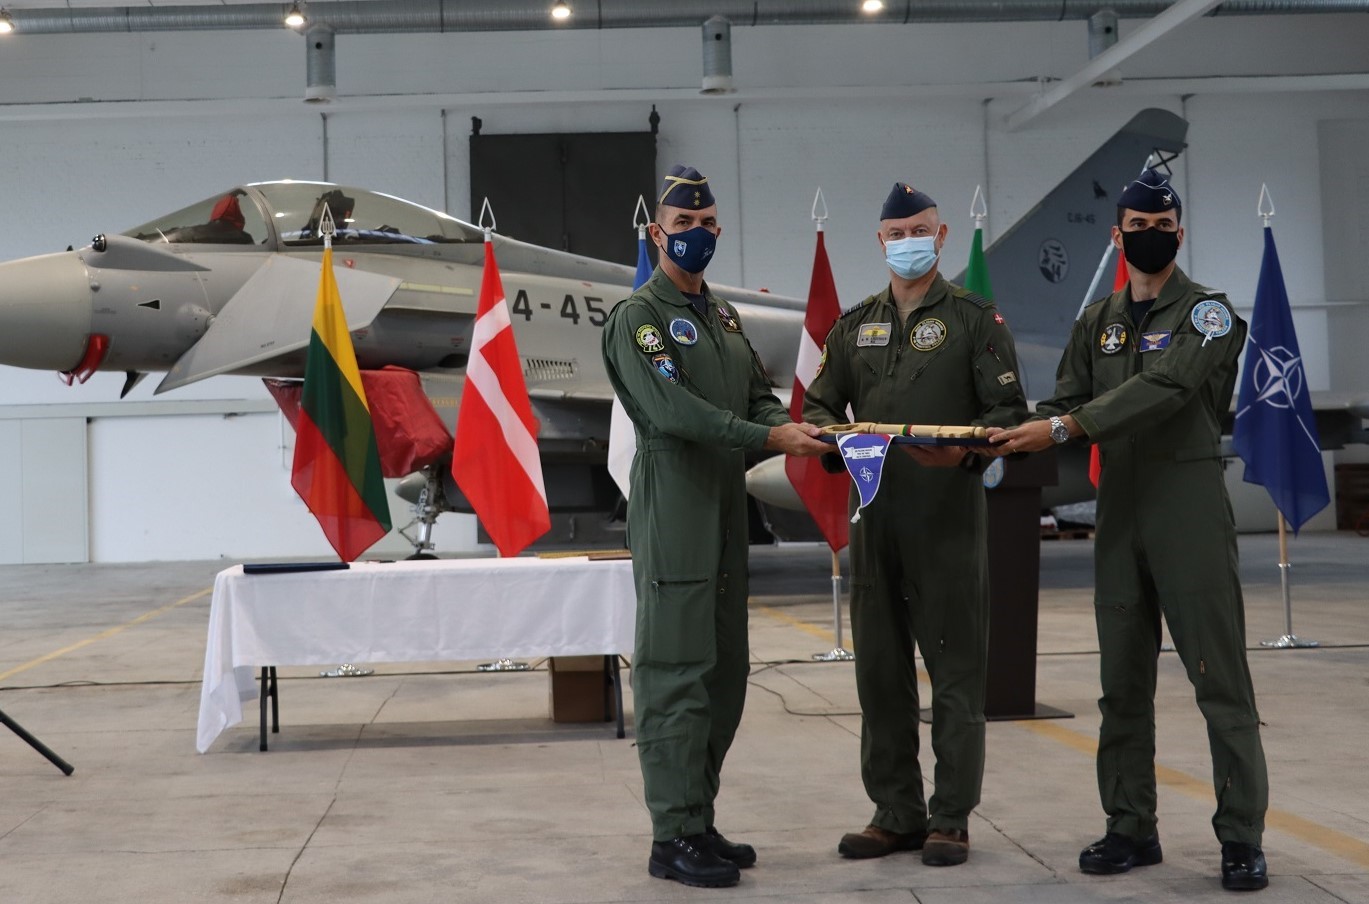 Presenting the symbolic key to the Baltic countries' airspace